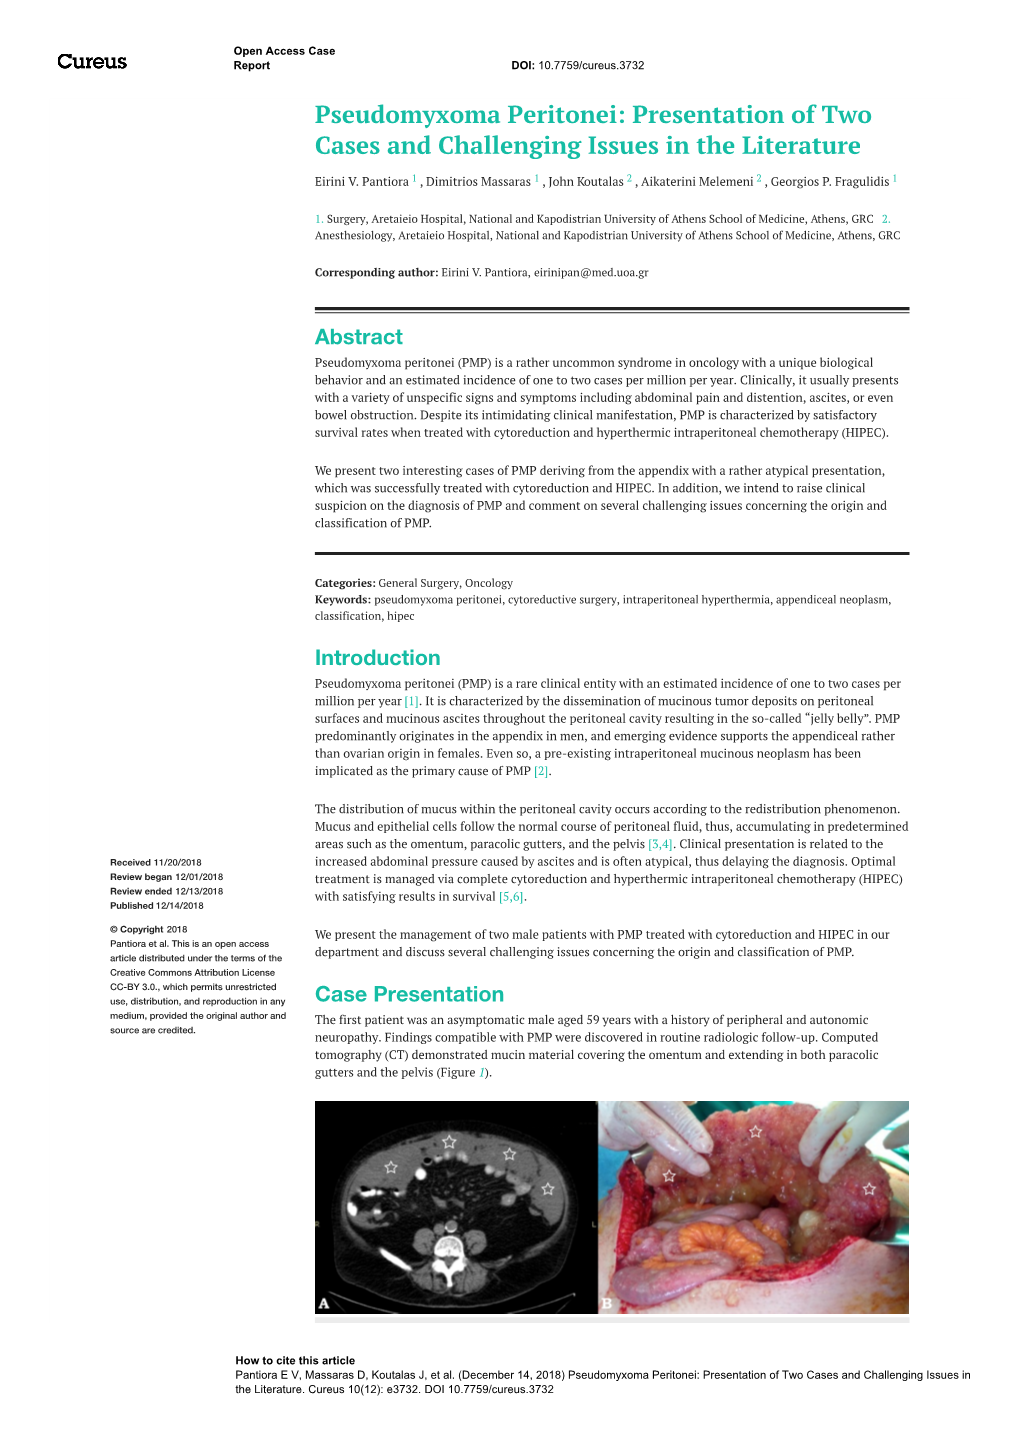 Pseudomyxoma Peritonei: Presentation of Two Cases and Challenging Issues in the Literature